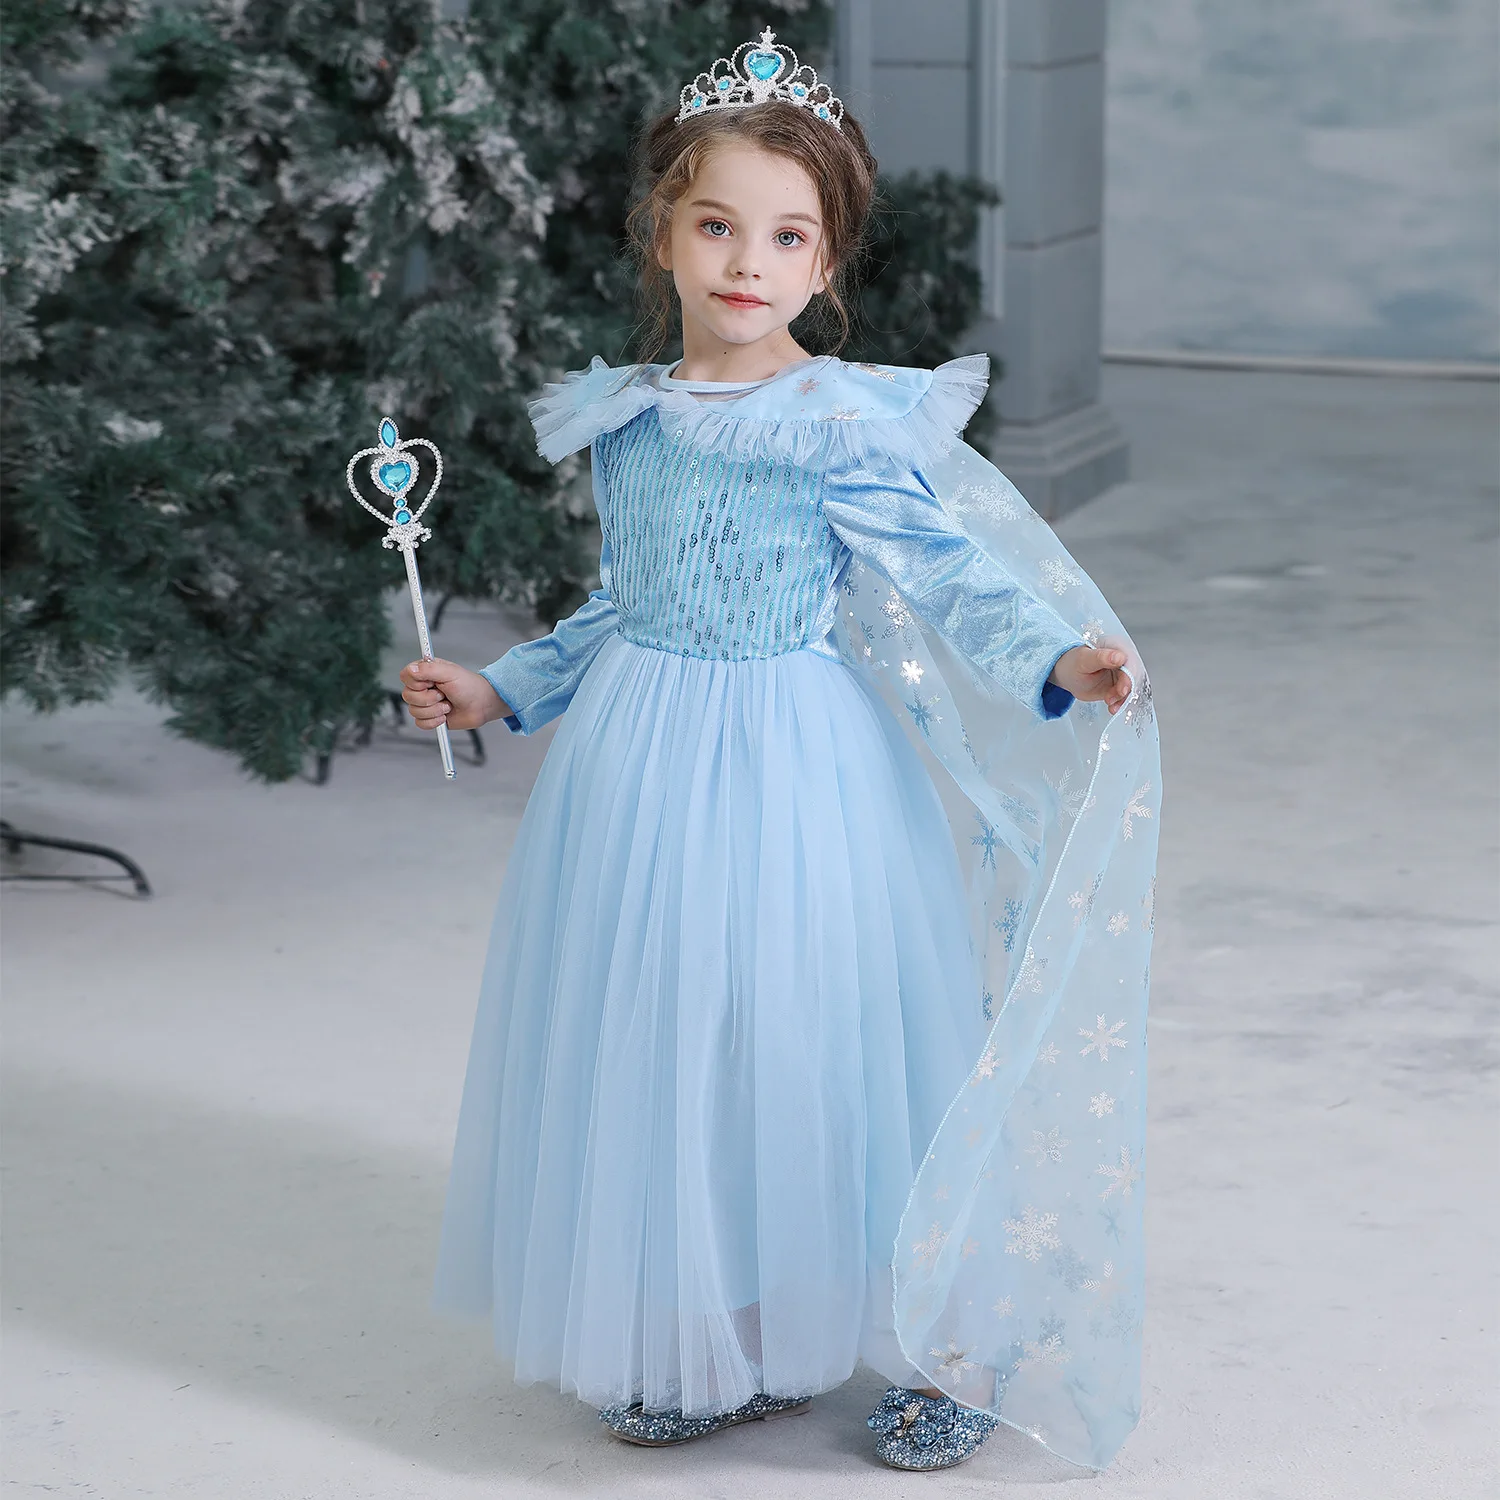 

Princess Anna Girls Halloween Costume Fancy Elsa Party Dress kids little baby anime cosplay clothing children birthday outfits